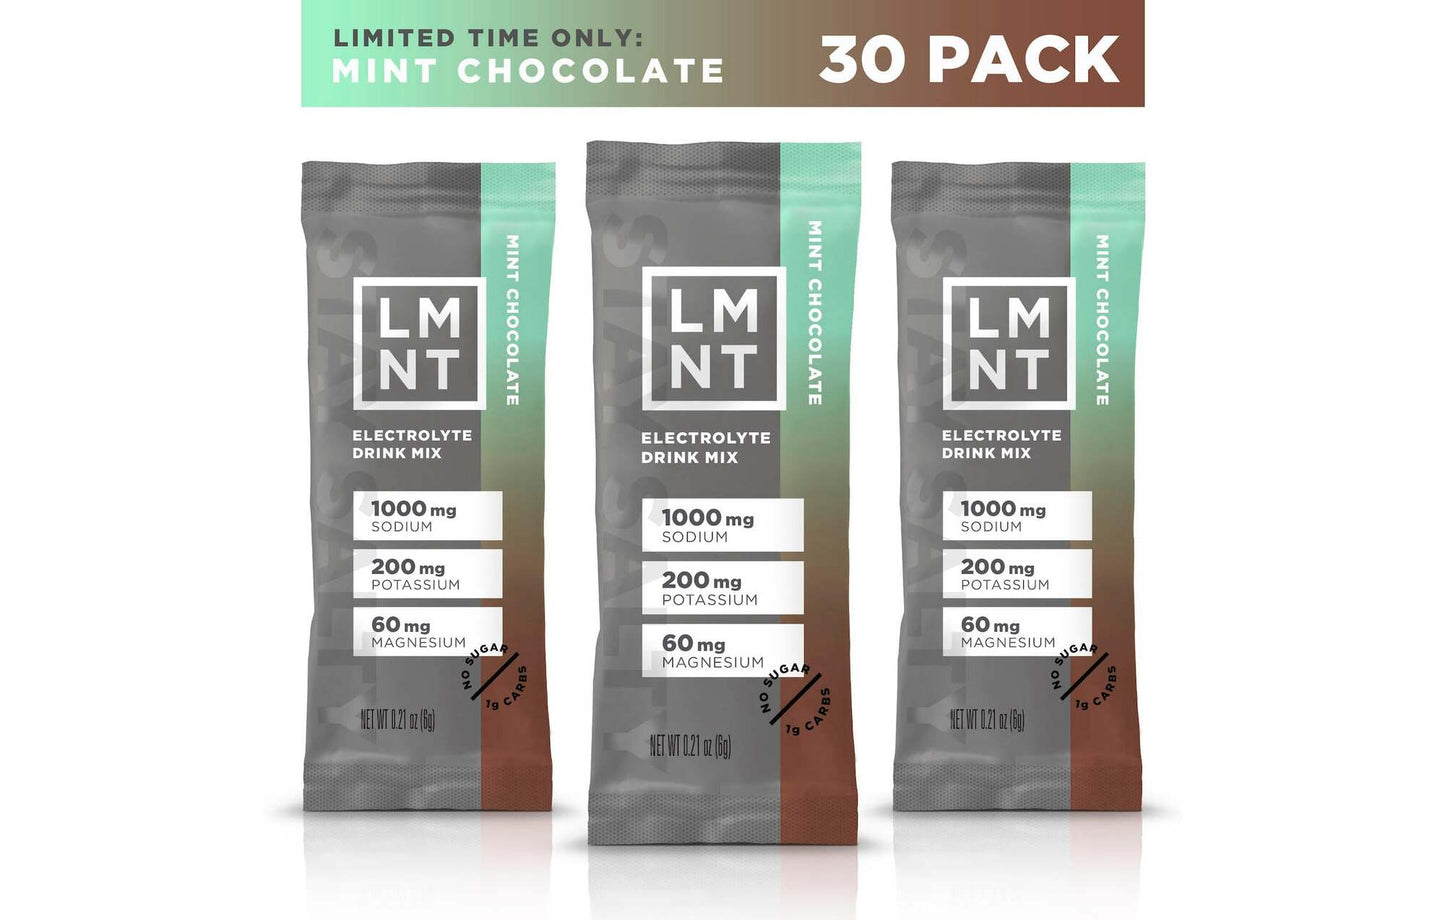 LMNT - ELECTROLYTES - RECHARGE - PACK OF 30